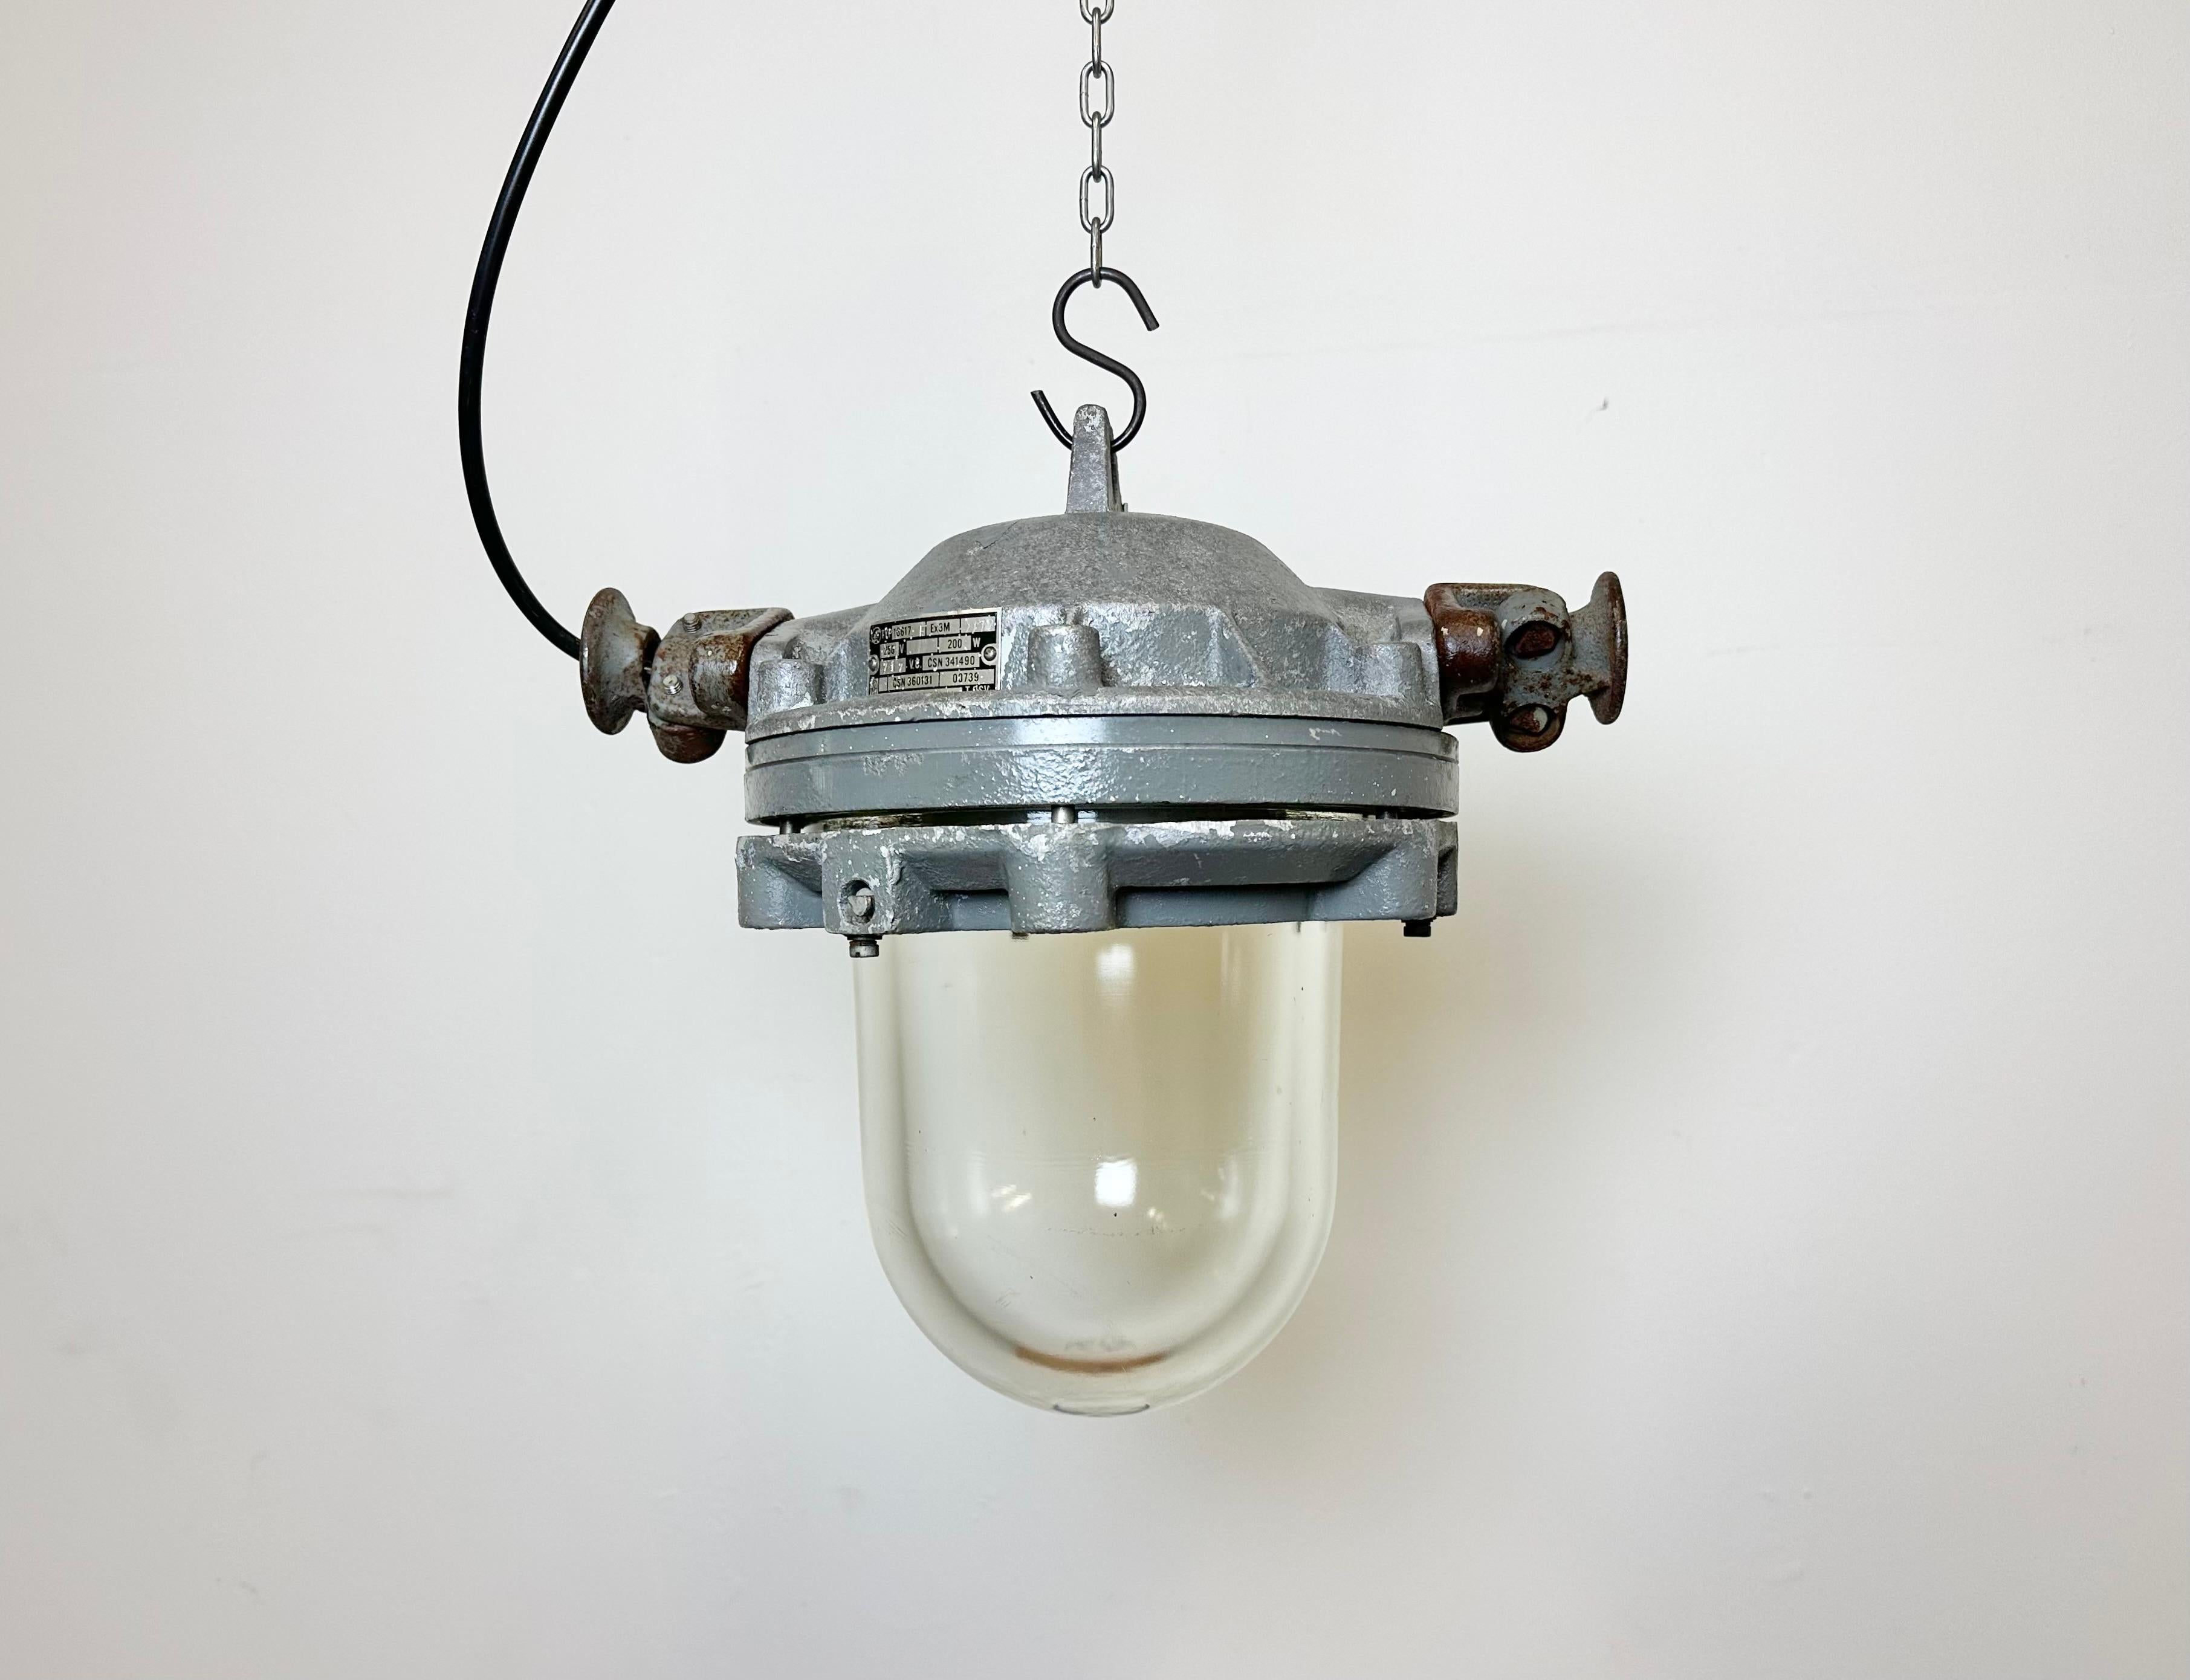 Dark grey industrial lamp with massive protective glass bulb made by Elektrosvit in former Czechoslovakia during the 1970s.It features a cast aluminium body and a explosion proof clear glass cover. Porcelain socket requires standard E27/ E26